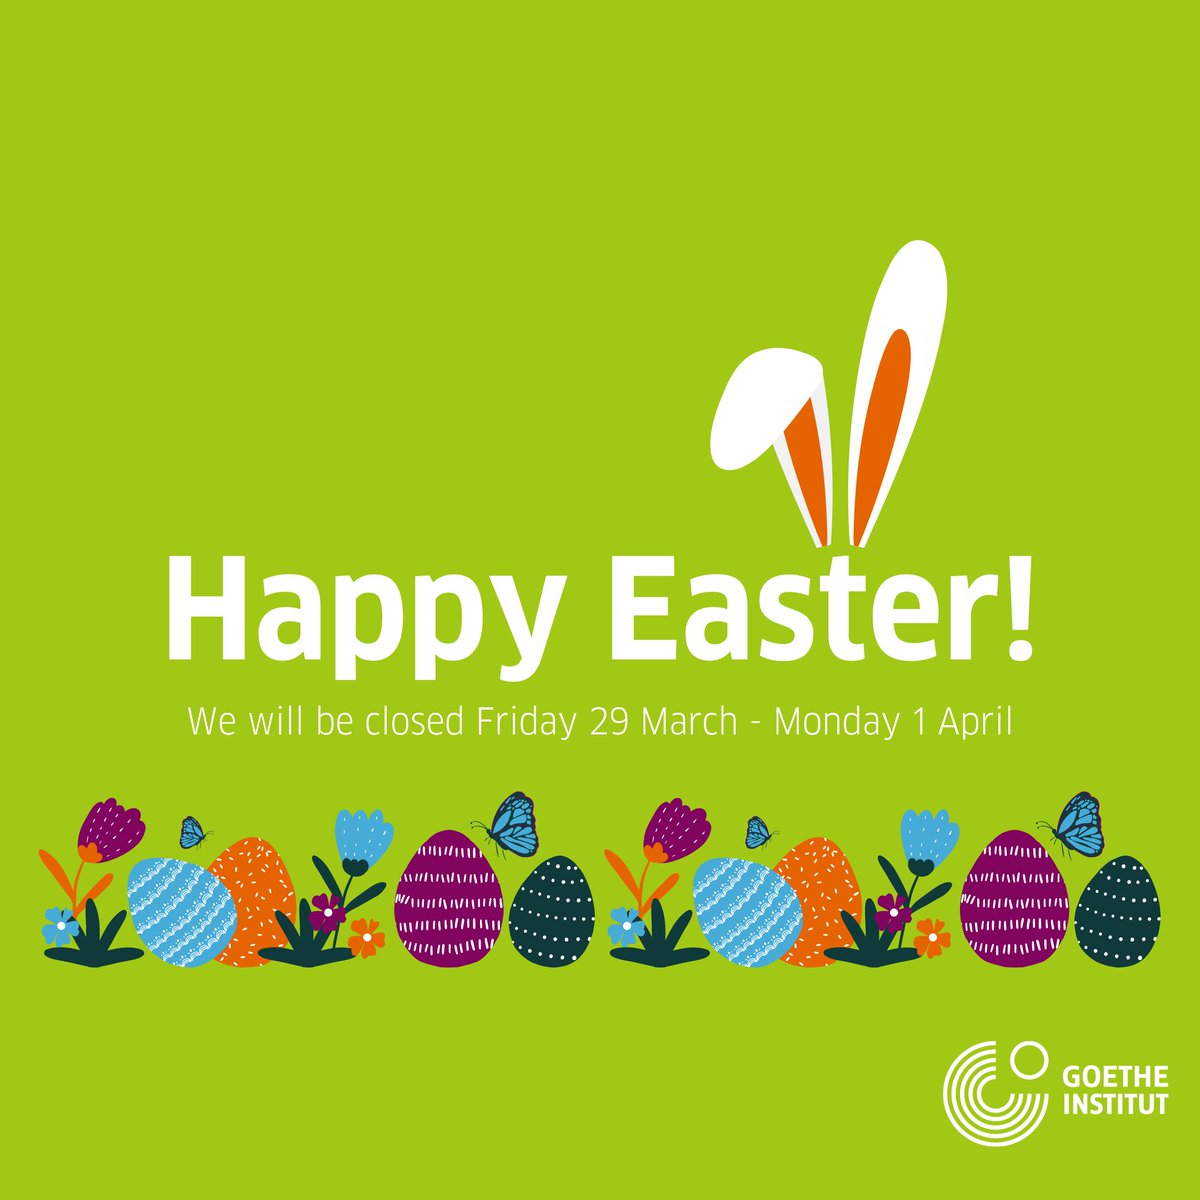 Frohe Ostern! 🐣🌷 The Goethe-Institut Glasgow will be closed over Easter weekend from Friday 29 March through Monday 1 April. We hope you enjoy the long weekend and we'll see you when we reopen on Tuesday 2 April.